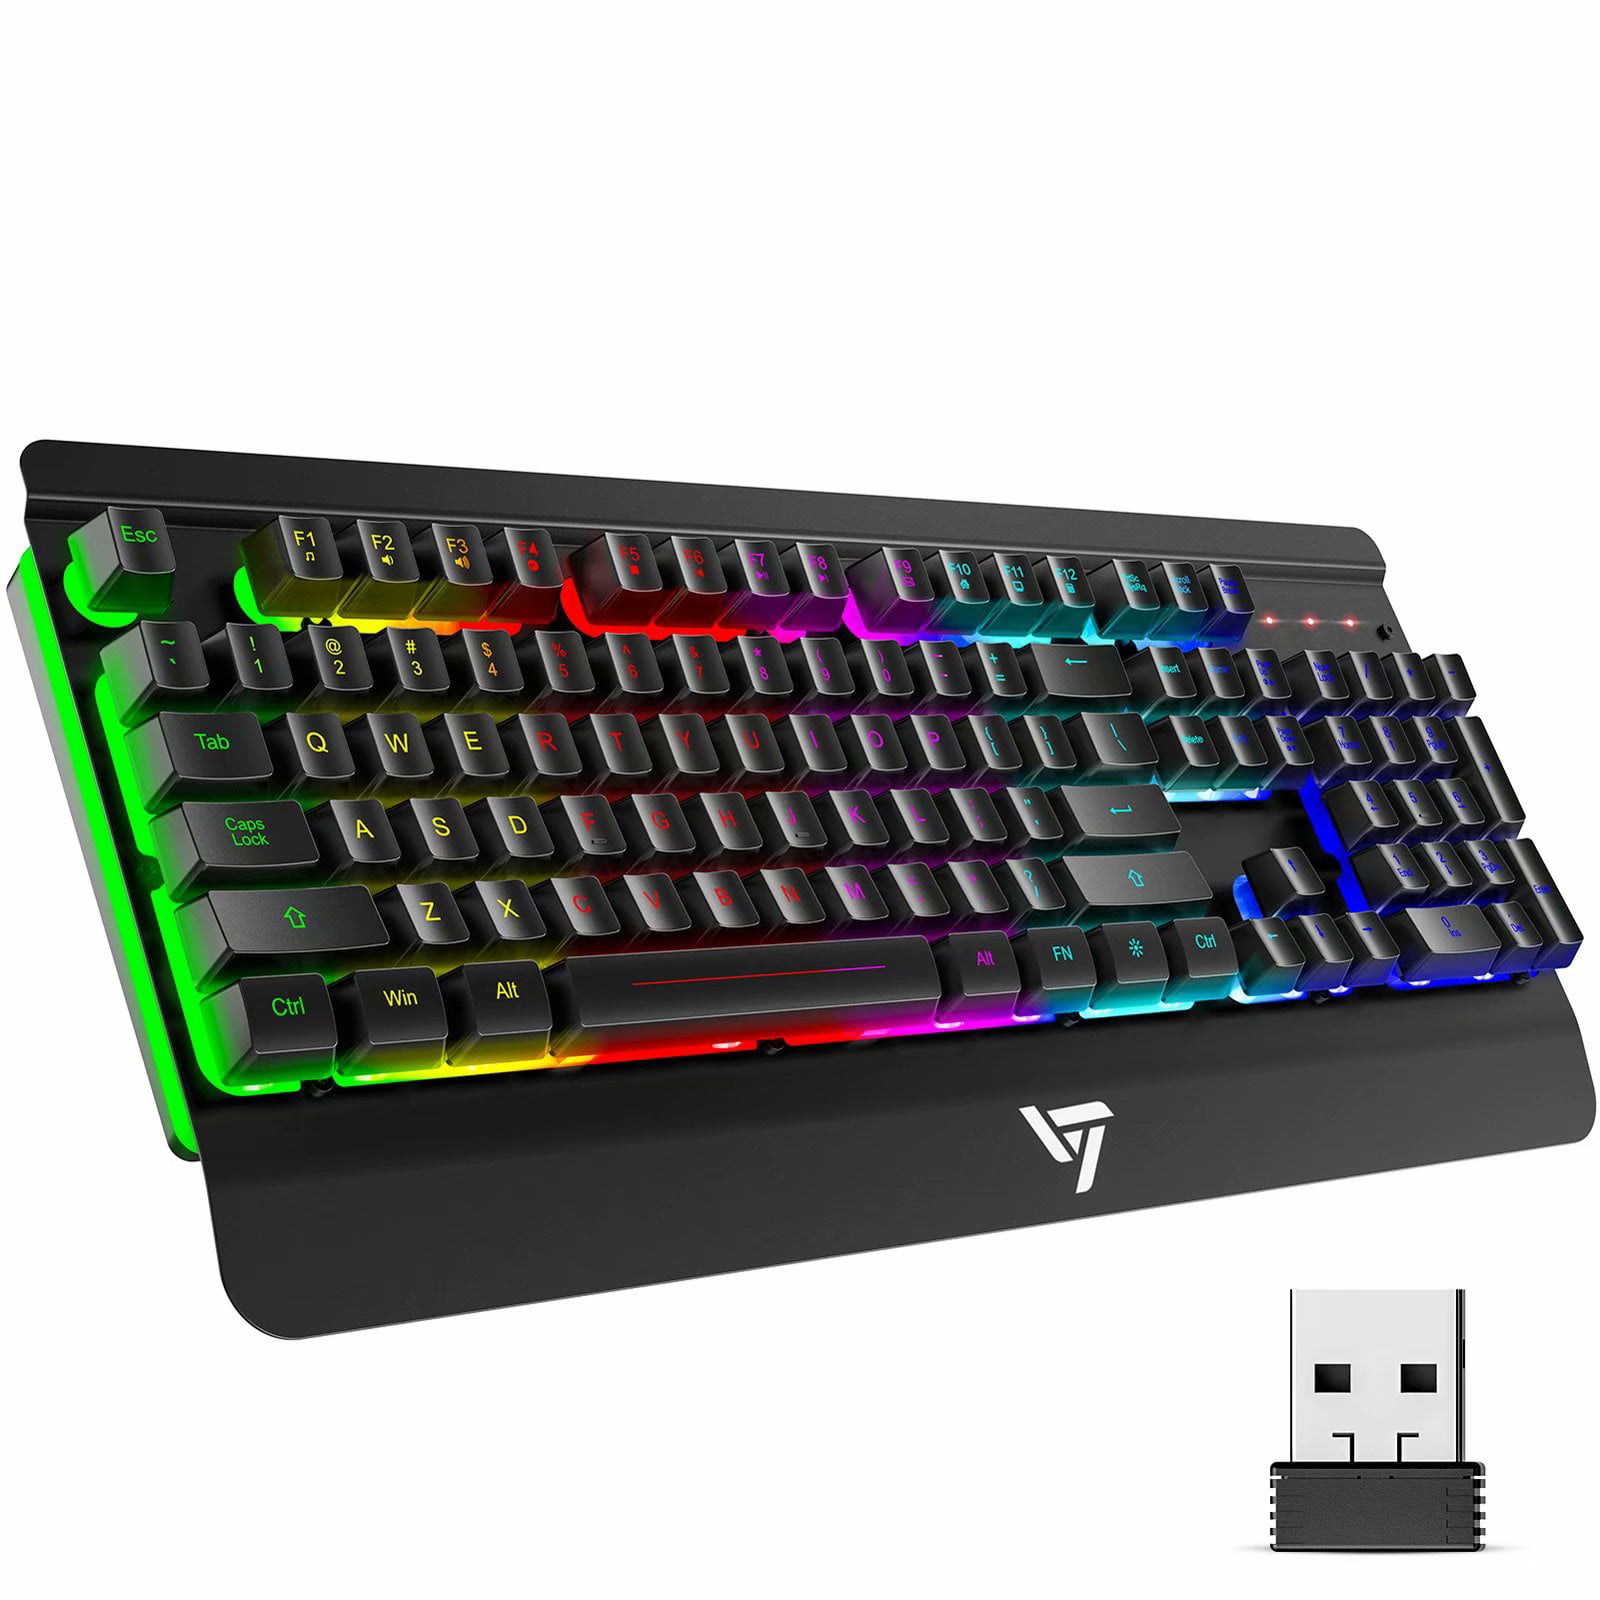 Black Spill-Resistant Rainbow LED Backlit Keyboard Ultra-Slim Computer Keyboard Ideal for PC/Mac Game VicTsing Gaming Keyboard with All-Metal Panel USB Wired Keyboard with Ergonomic Wrist Rest 